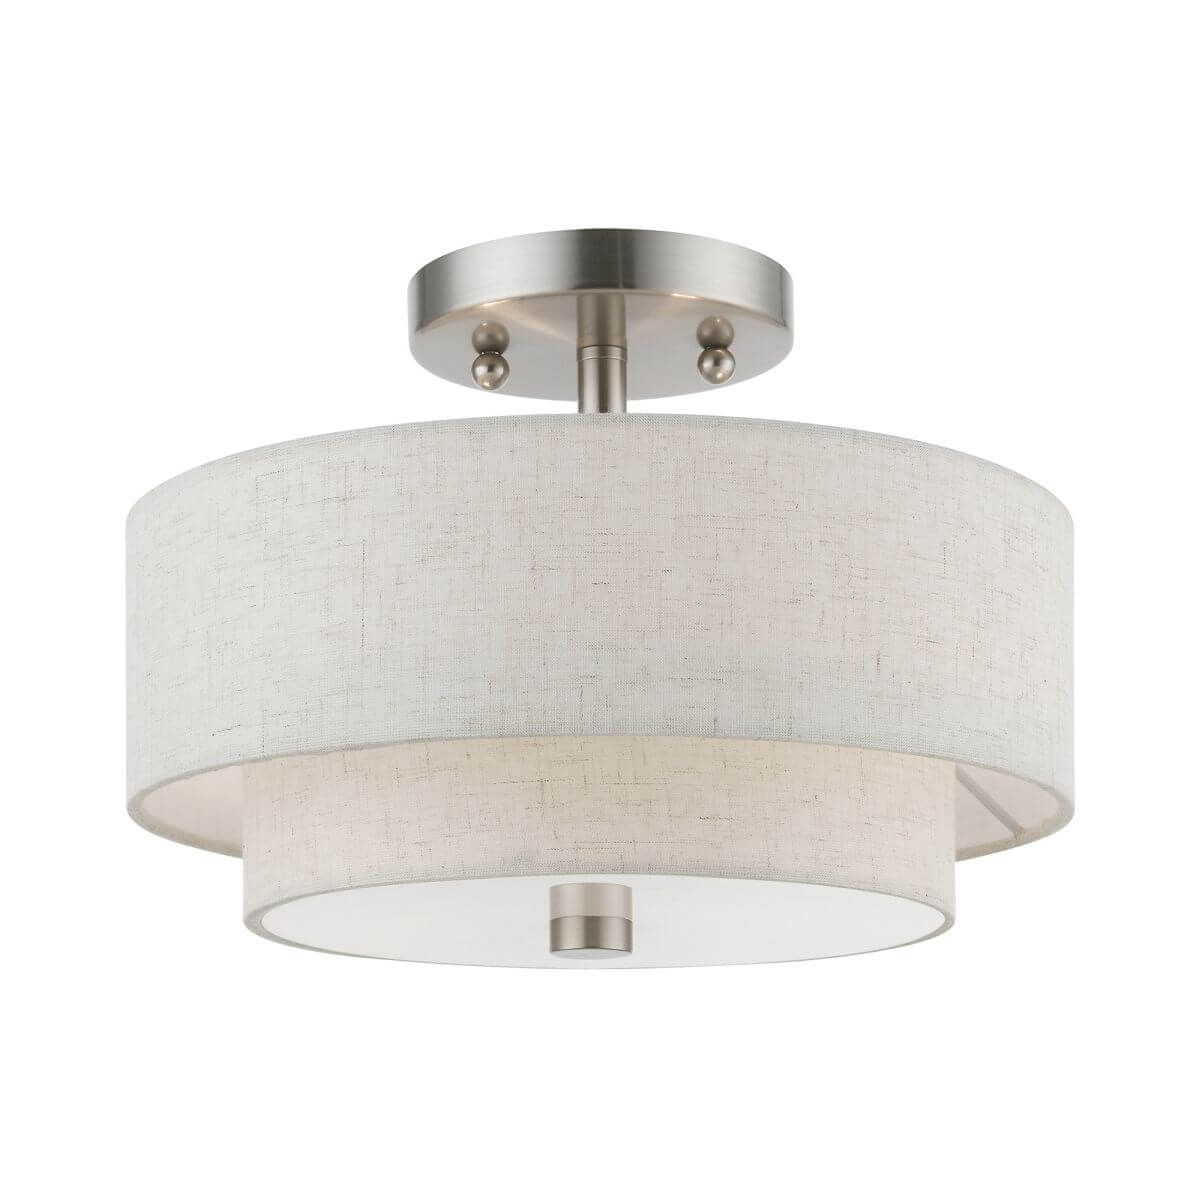 Livex 51082-91 Meridian 2 Light 11 inch Semi-Flush Mount in Brushed Nickel with Hand Crafted Oatmeal Color Hardback Fabric Shade - White Fabric Inside